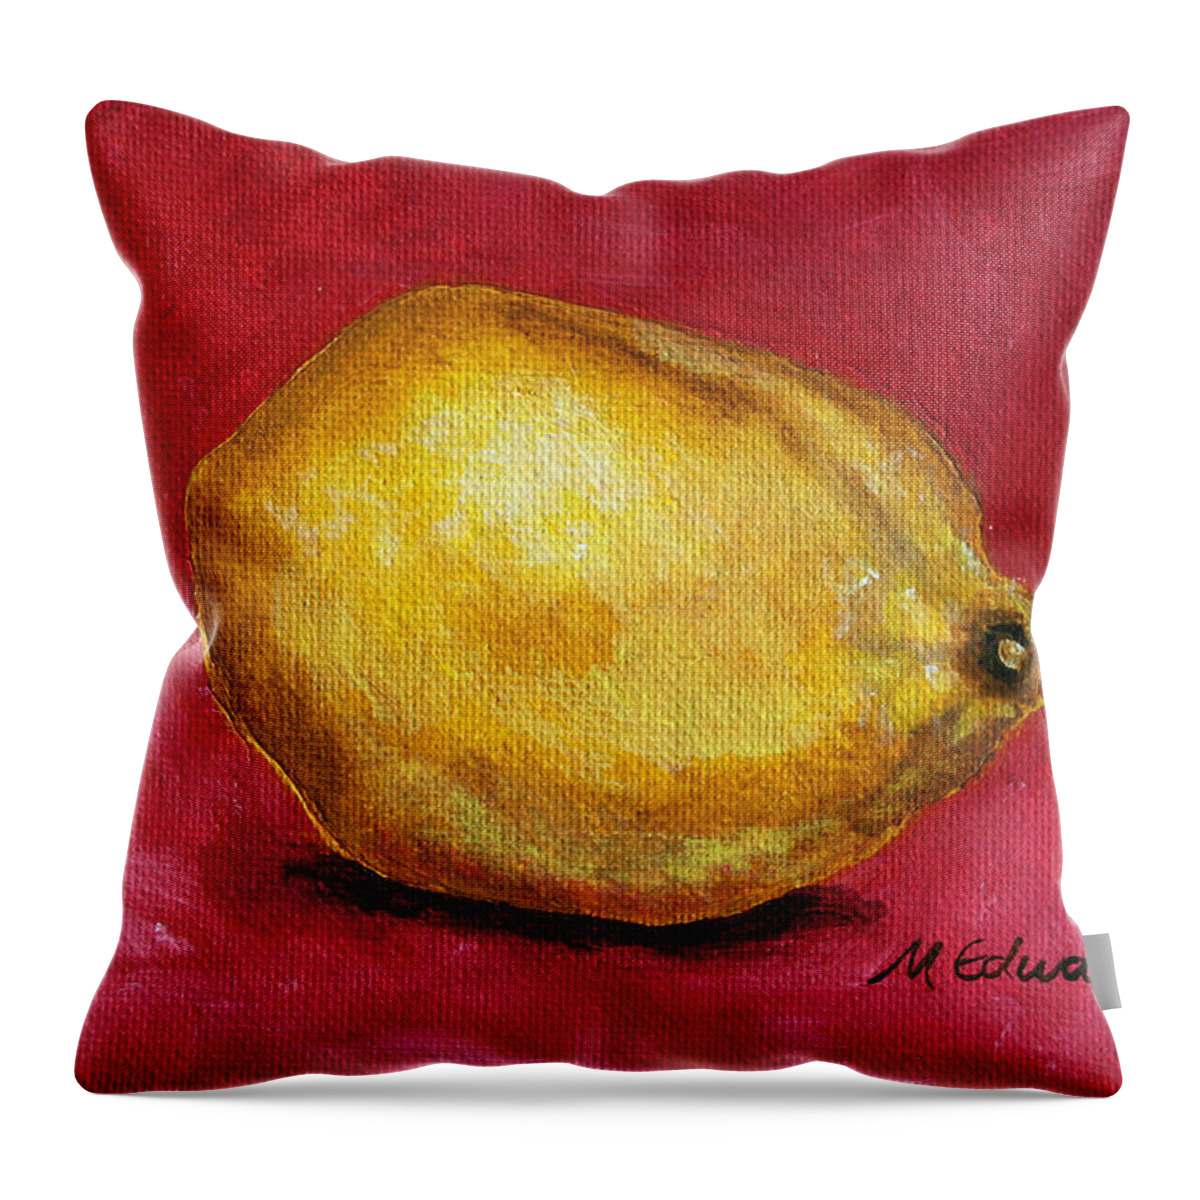 Lemon Throw Pillow featuring the painting Lemon Pink by Marna Edwards Flavell